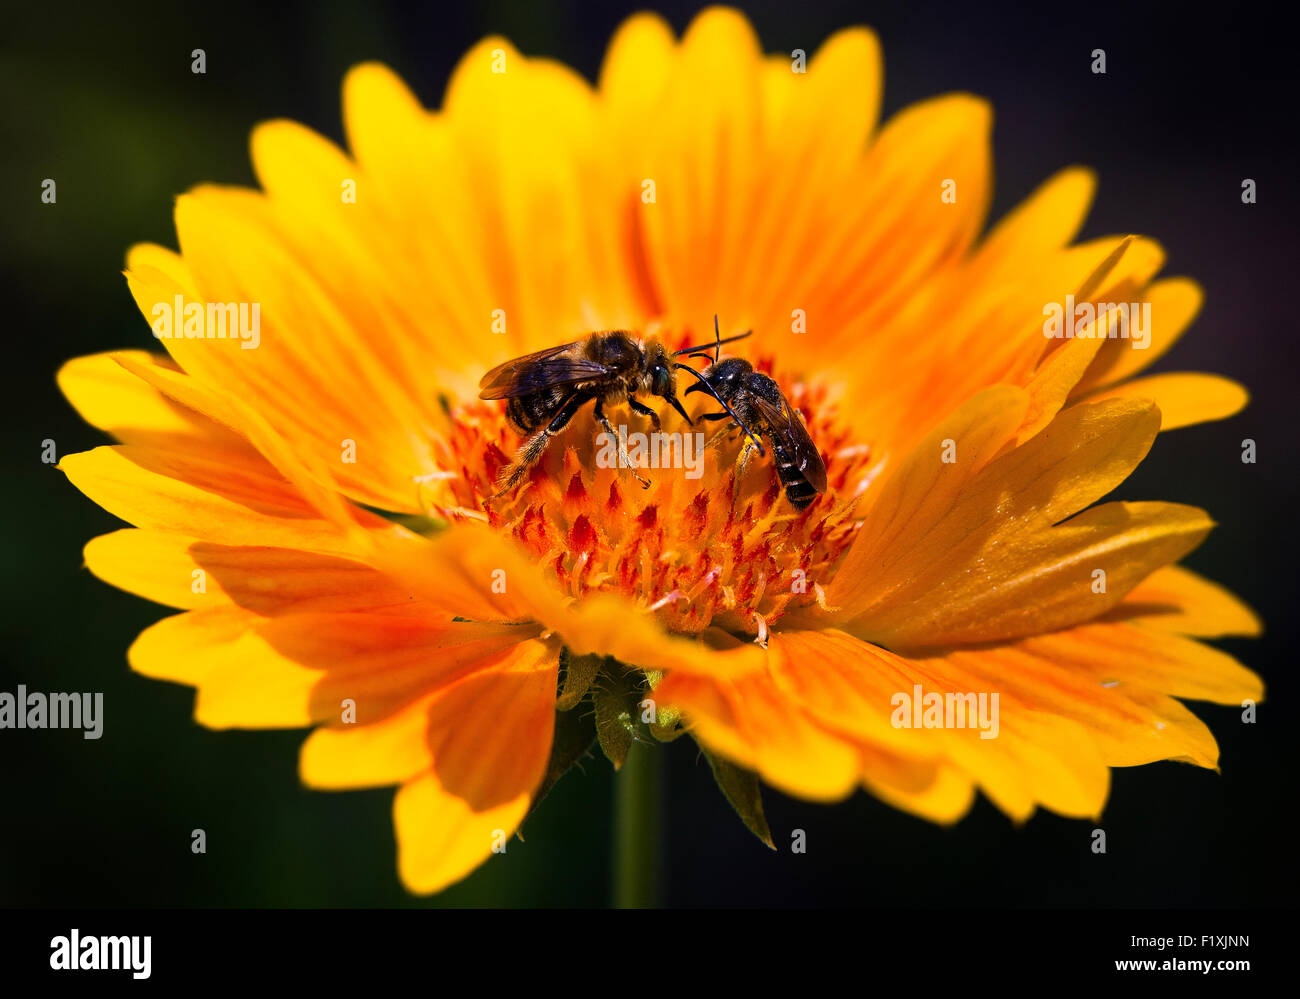 Close-Up photograph of a bright yellow angelita daisy with two bee's in the center of the bloom Stock Photo